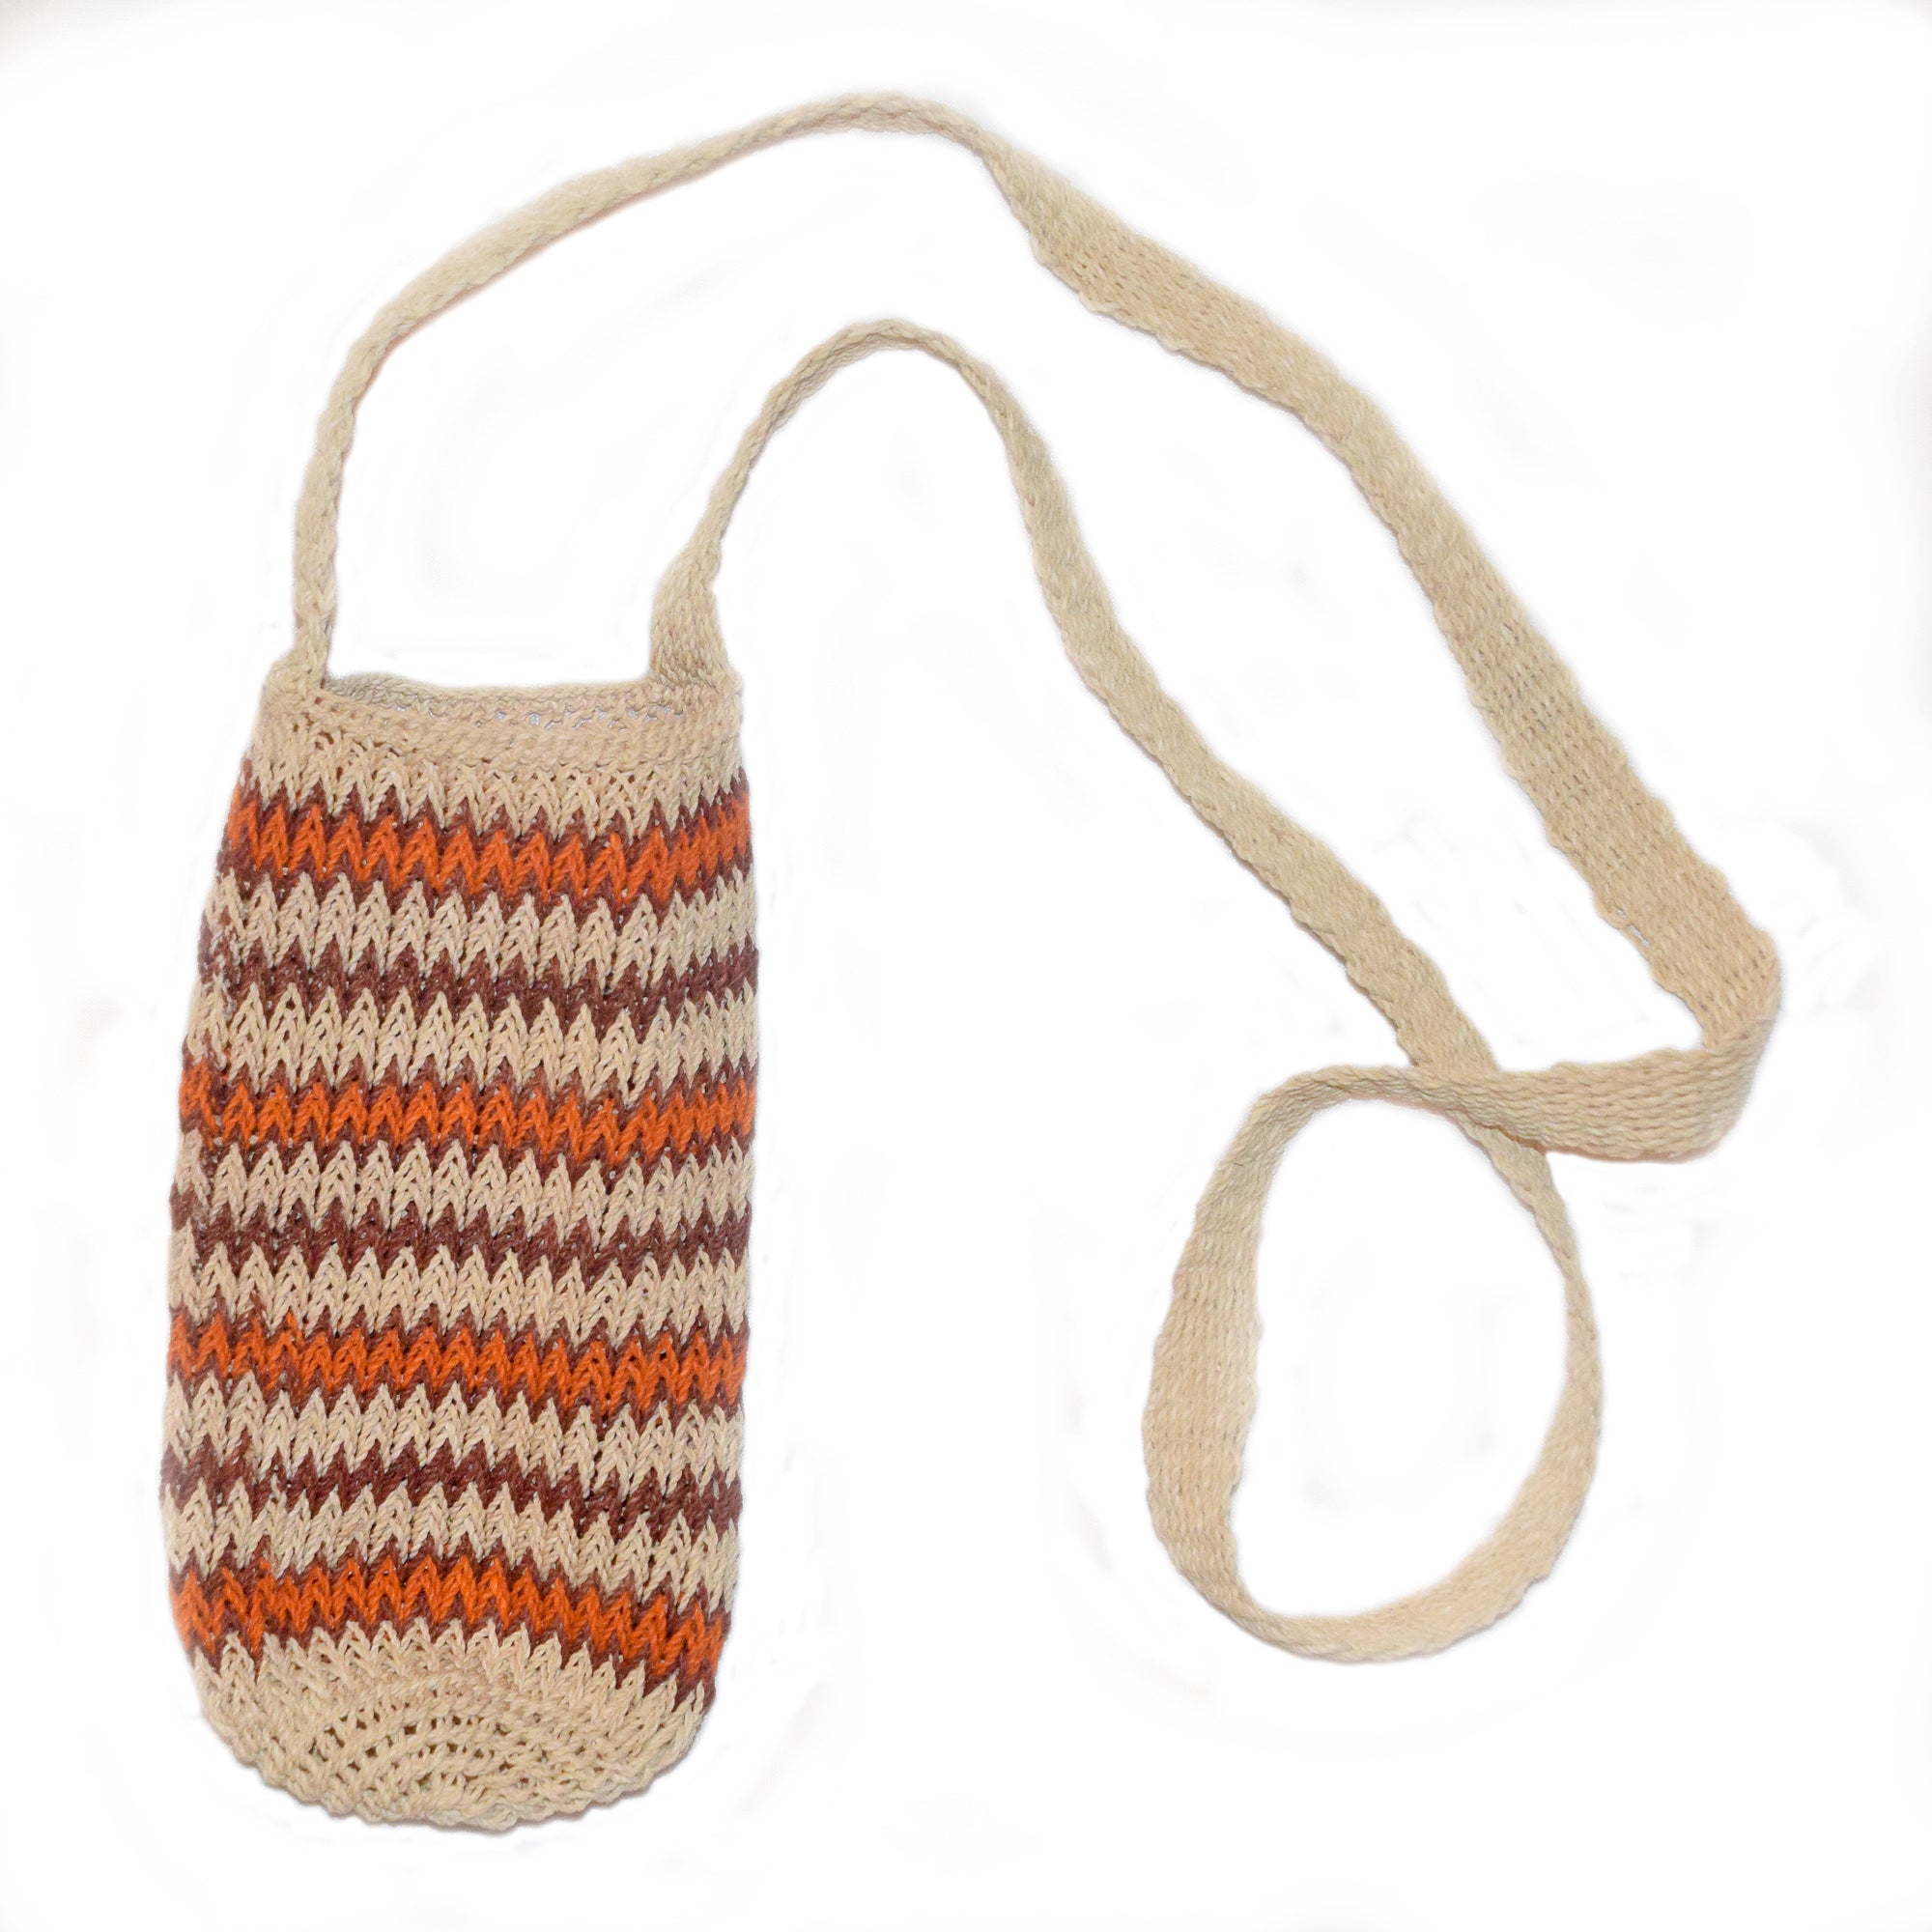 Fair-Trade Bottle Carrier/Wine Tote with maroon and orange zig-zag bands